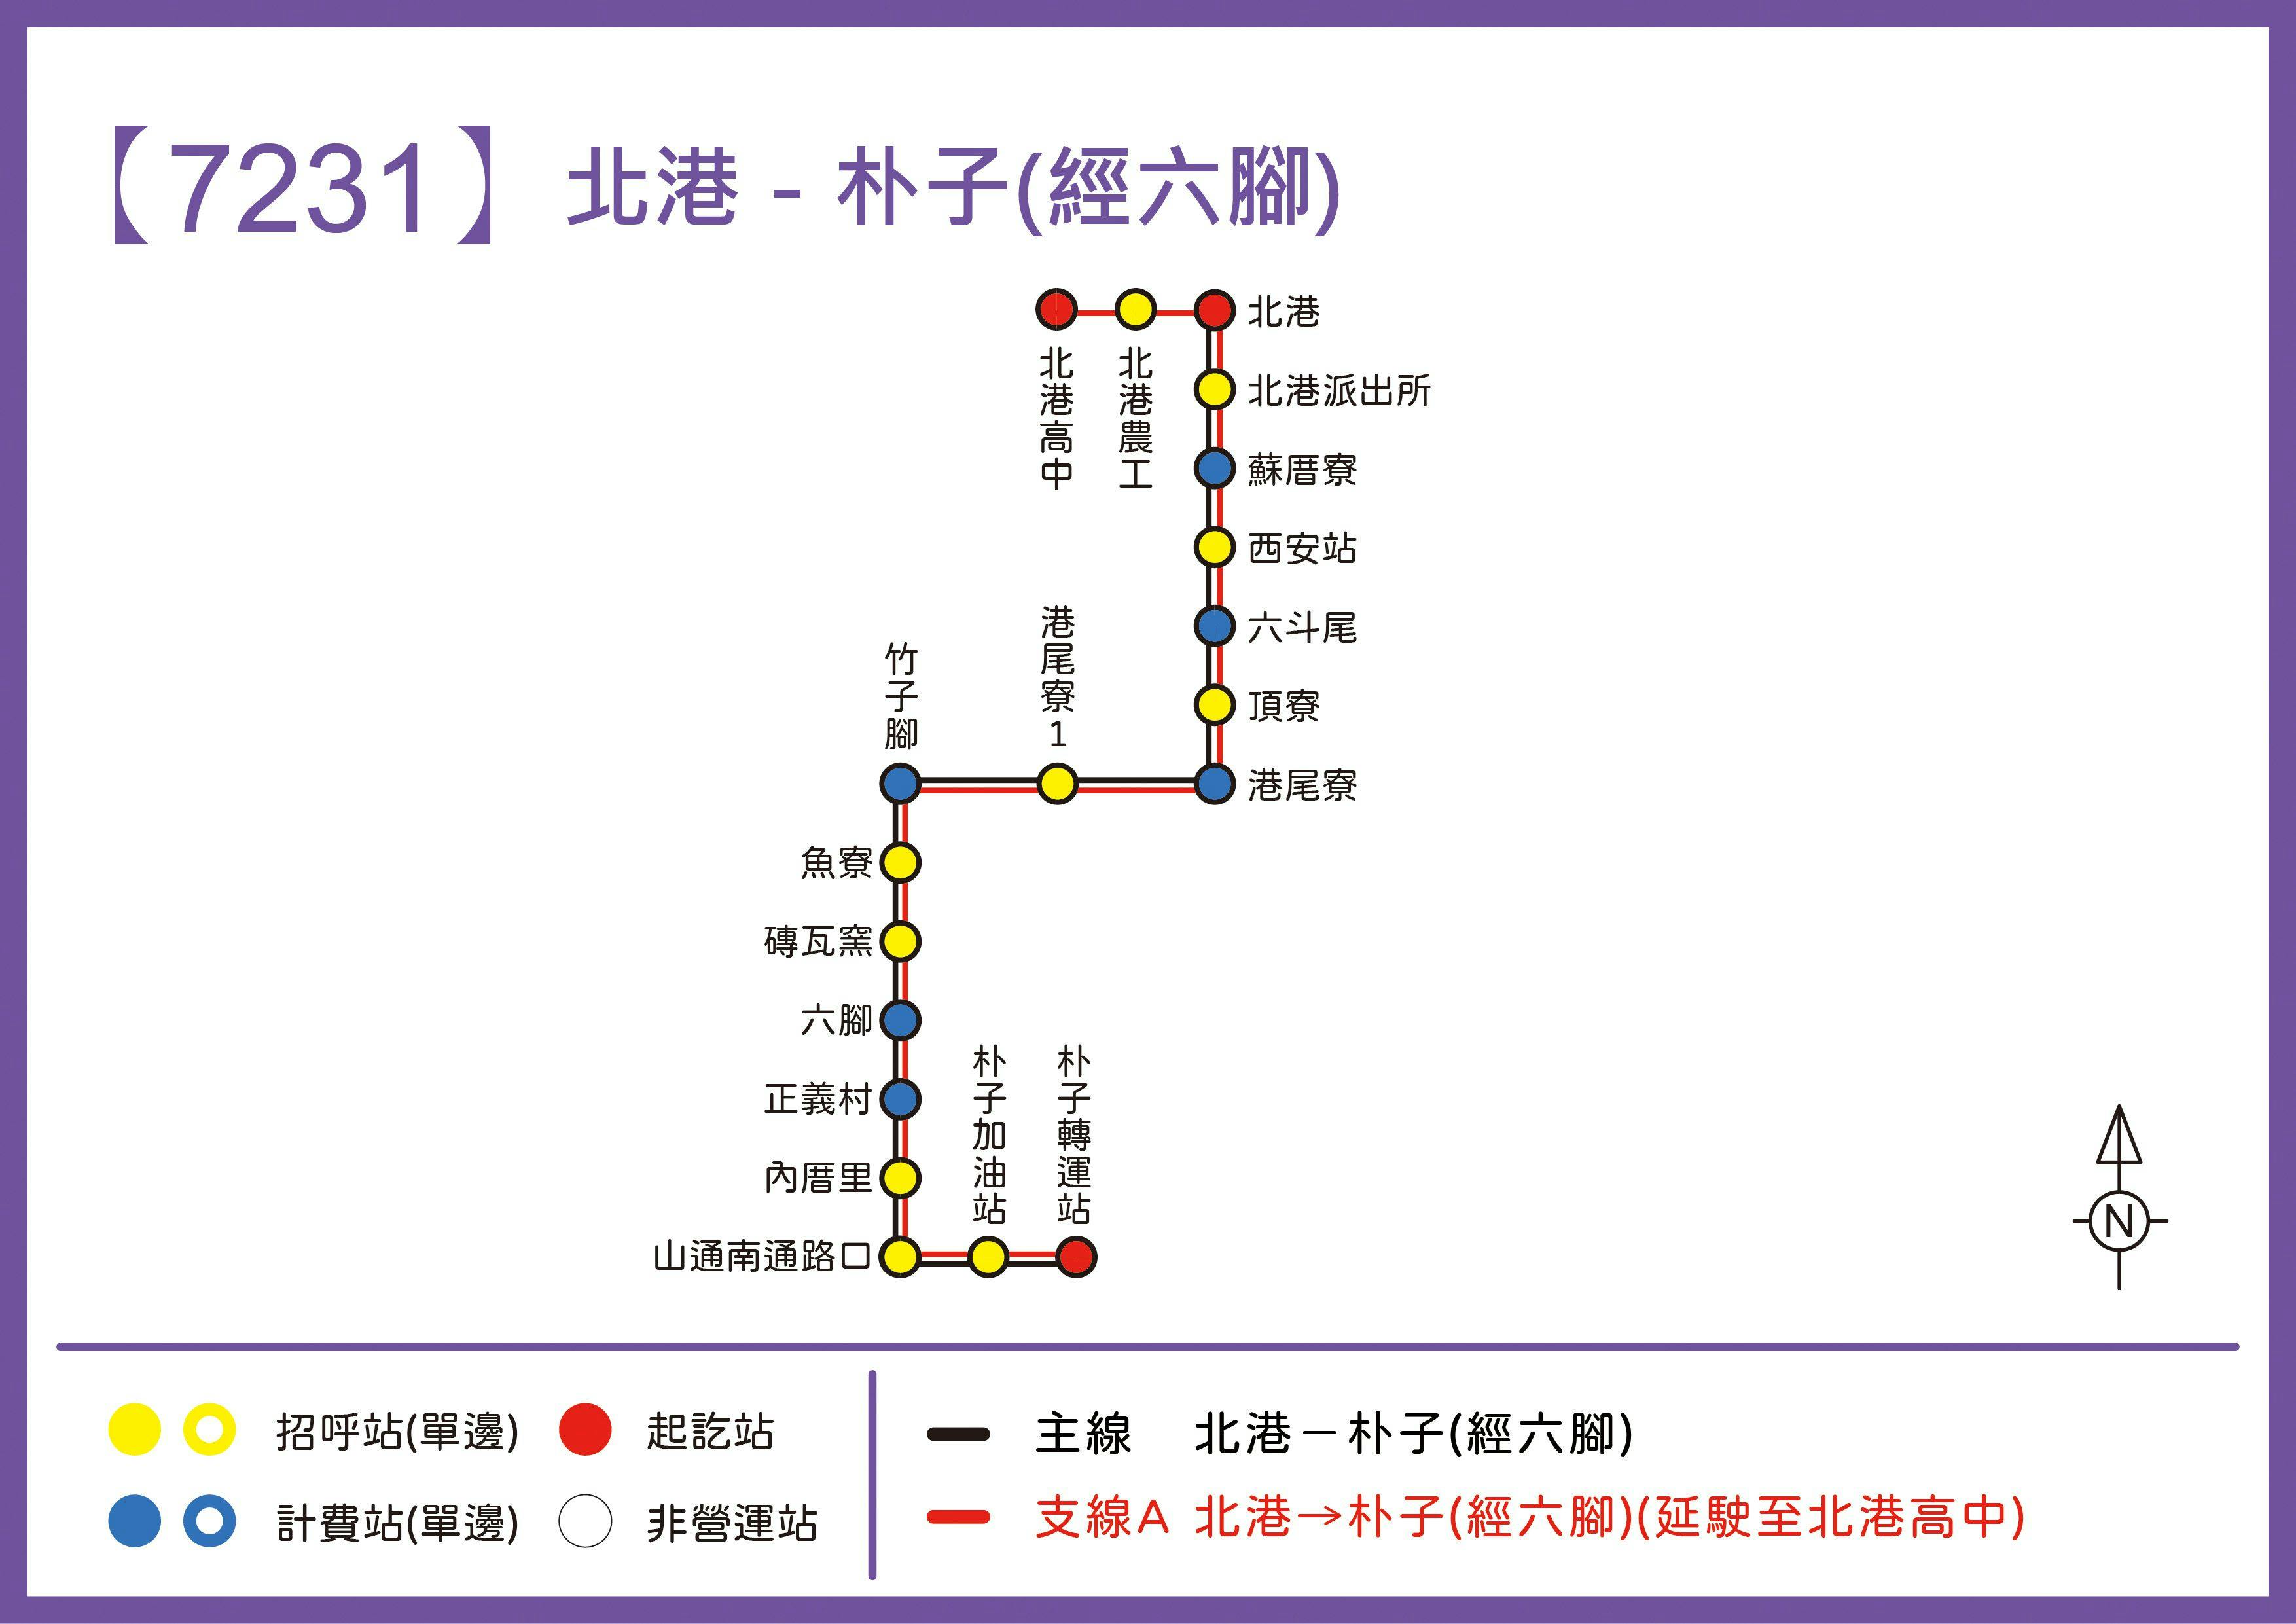 7231Route Map-Chiayi Bus